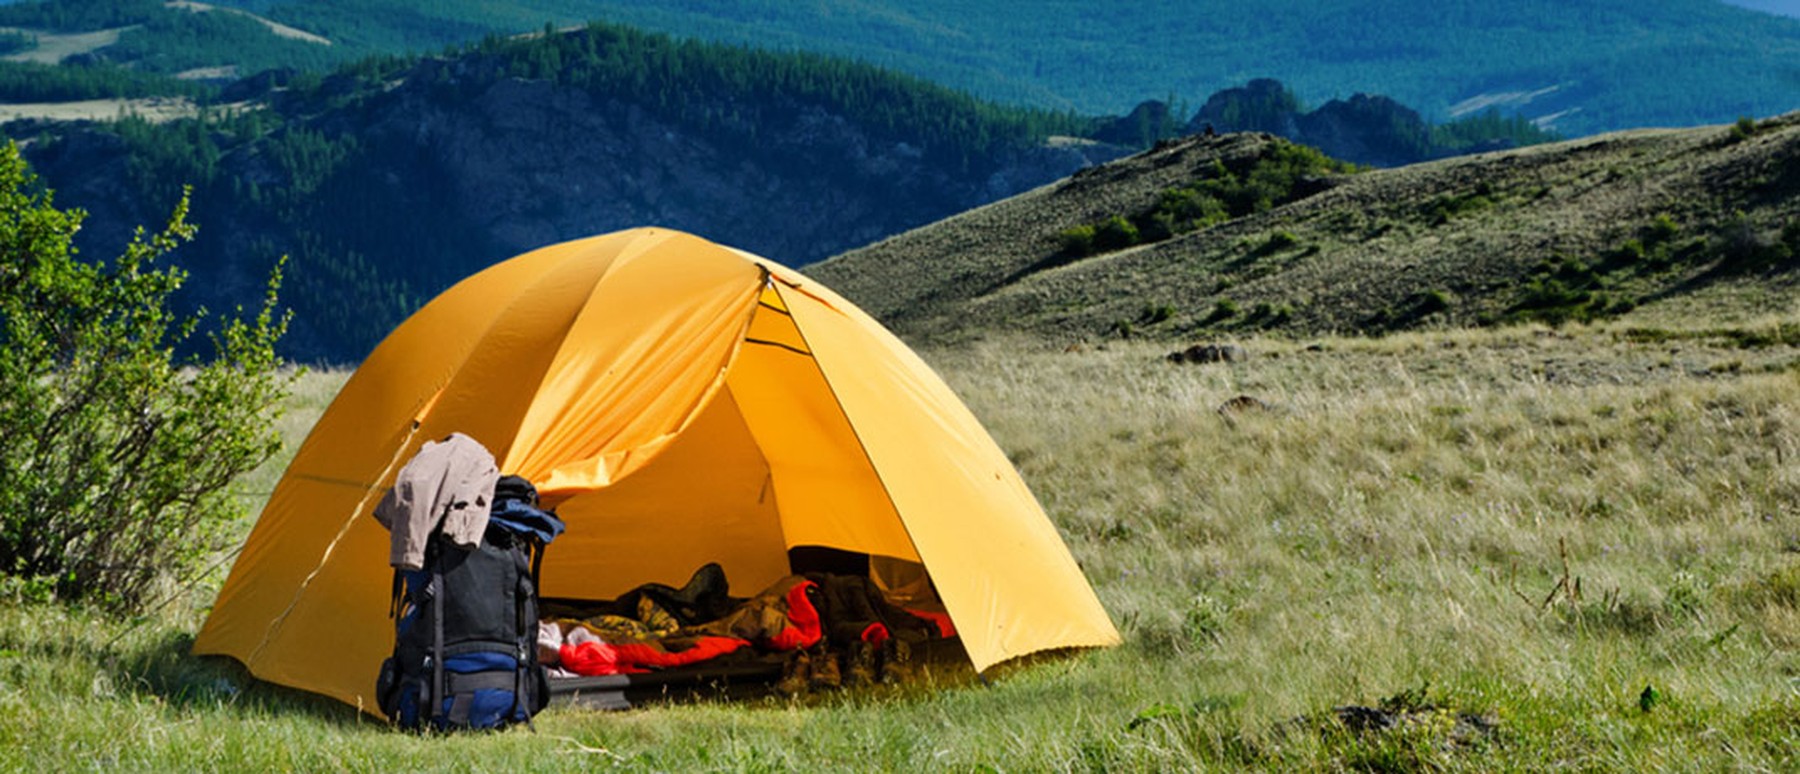 Fall into savings on discounted outdoor gear